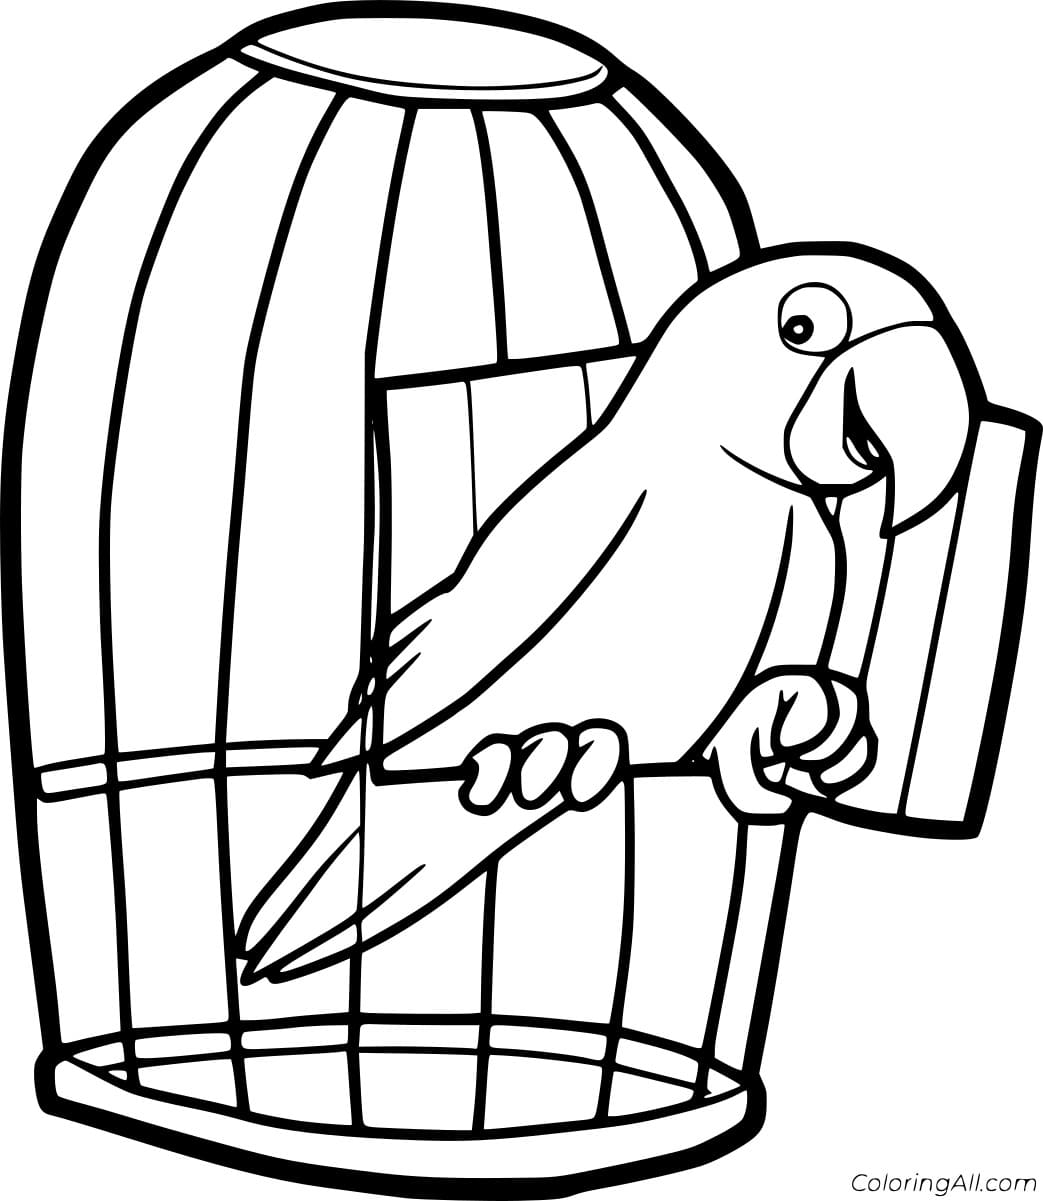 Parrot In The Cage Coloring Free Printable Coloring Page